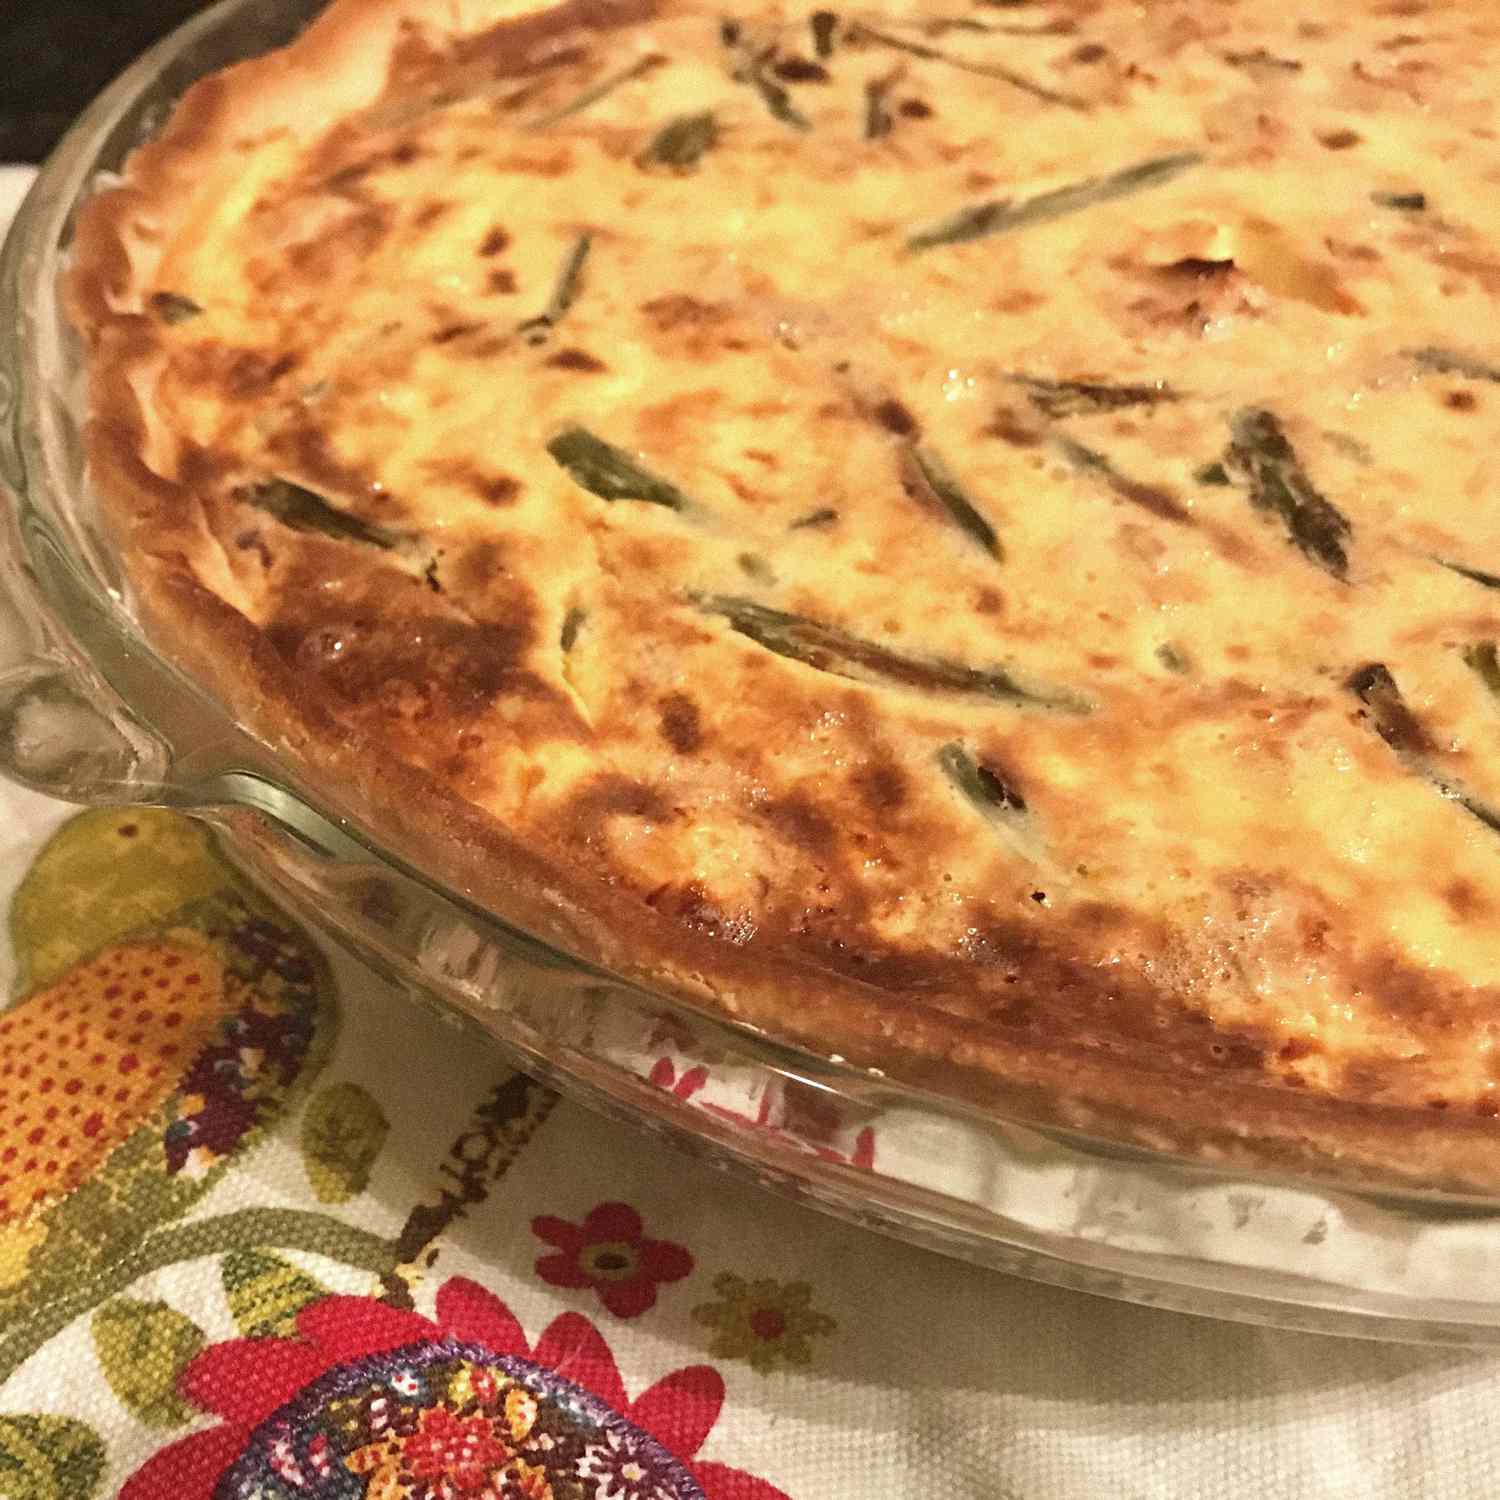 Easy Salmon and Asparagus Quiche in a glass pan